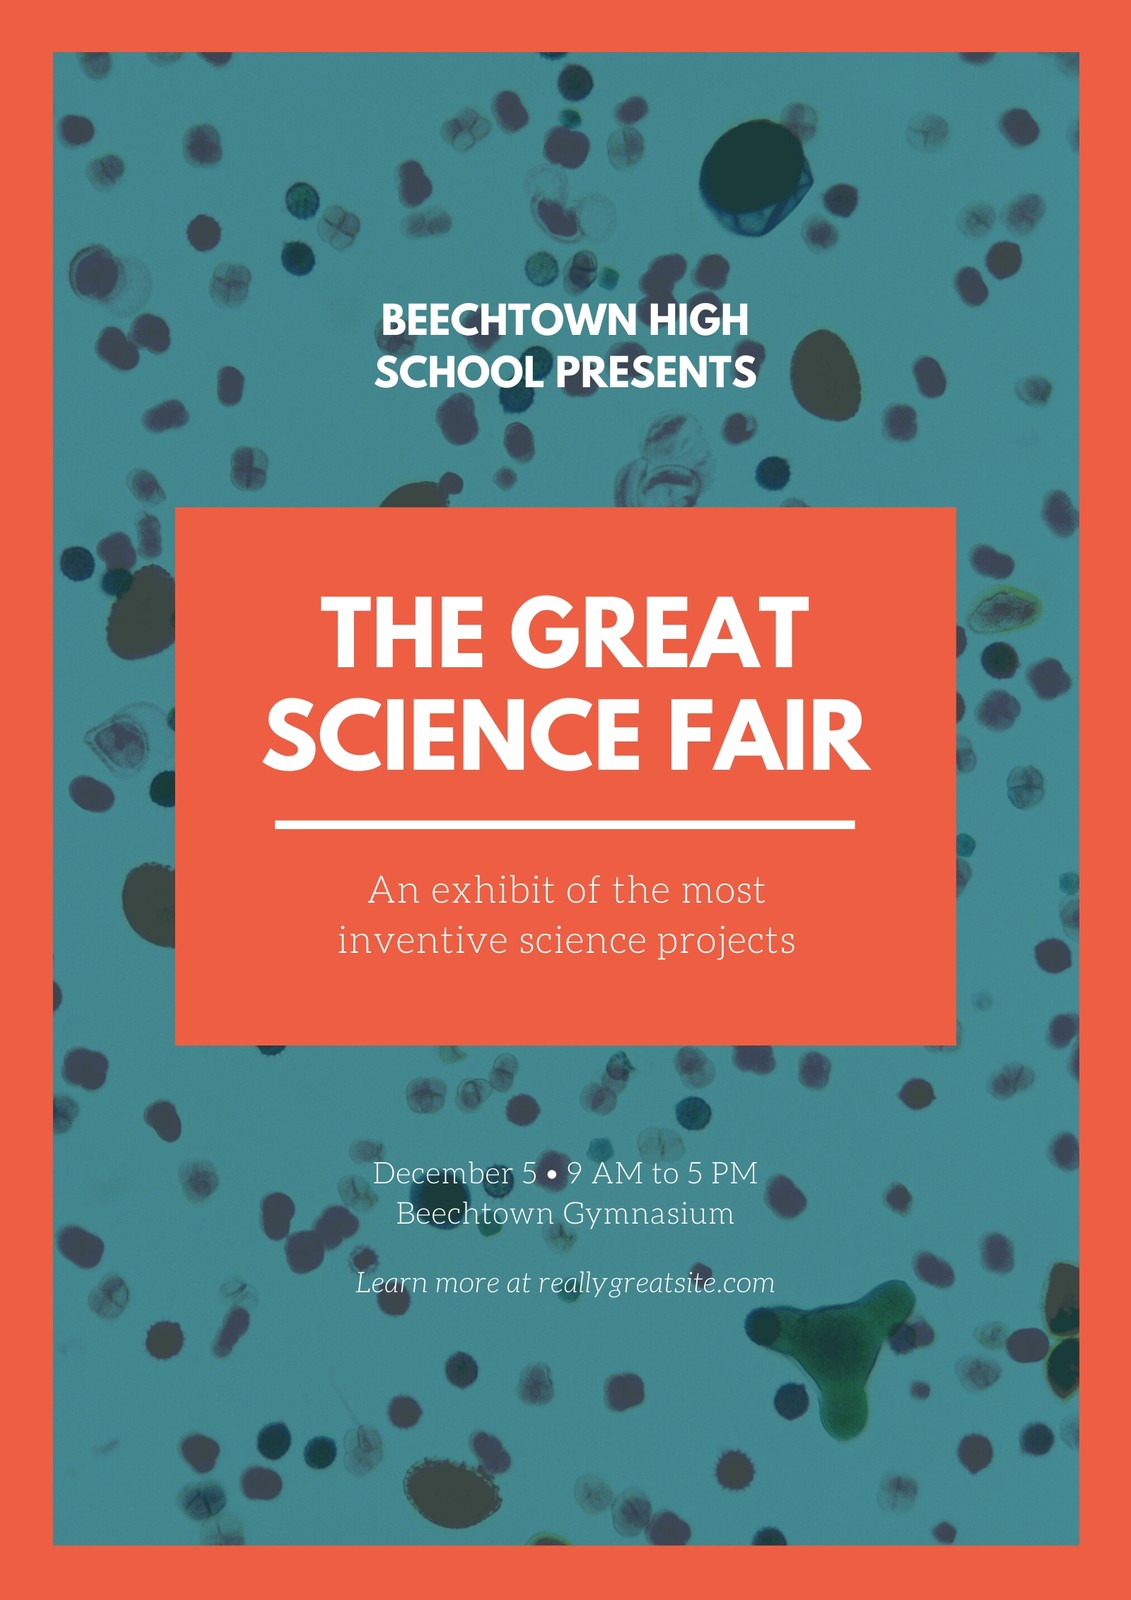 Customize 23+ Science Fair Posters Templates Online - Canva With Science Fair Banner Template